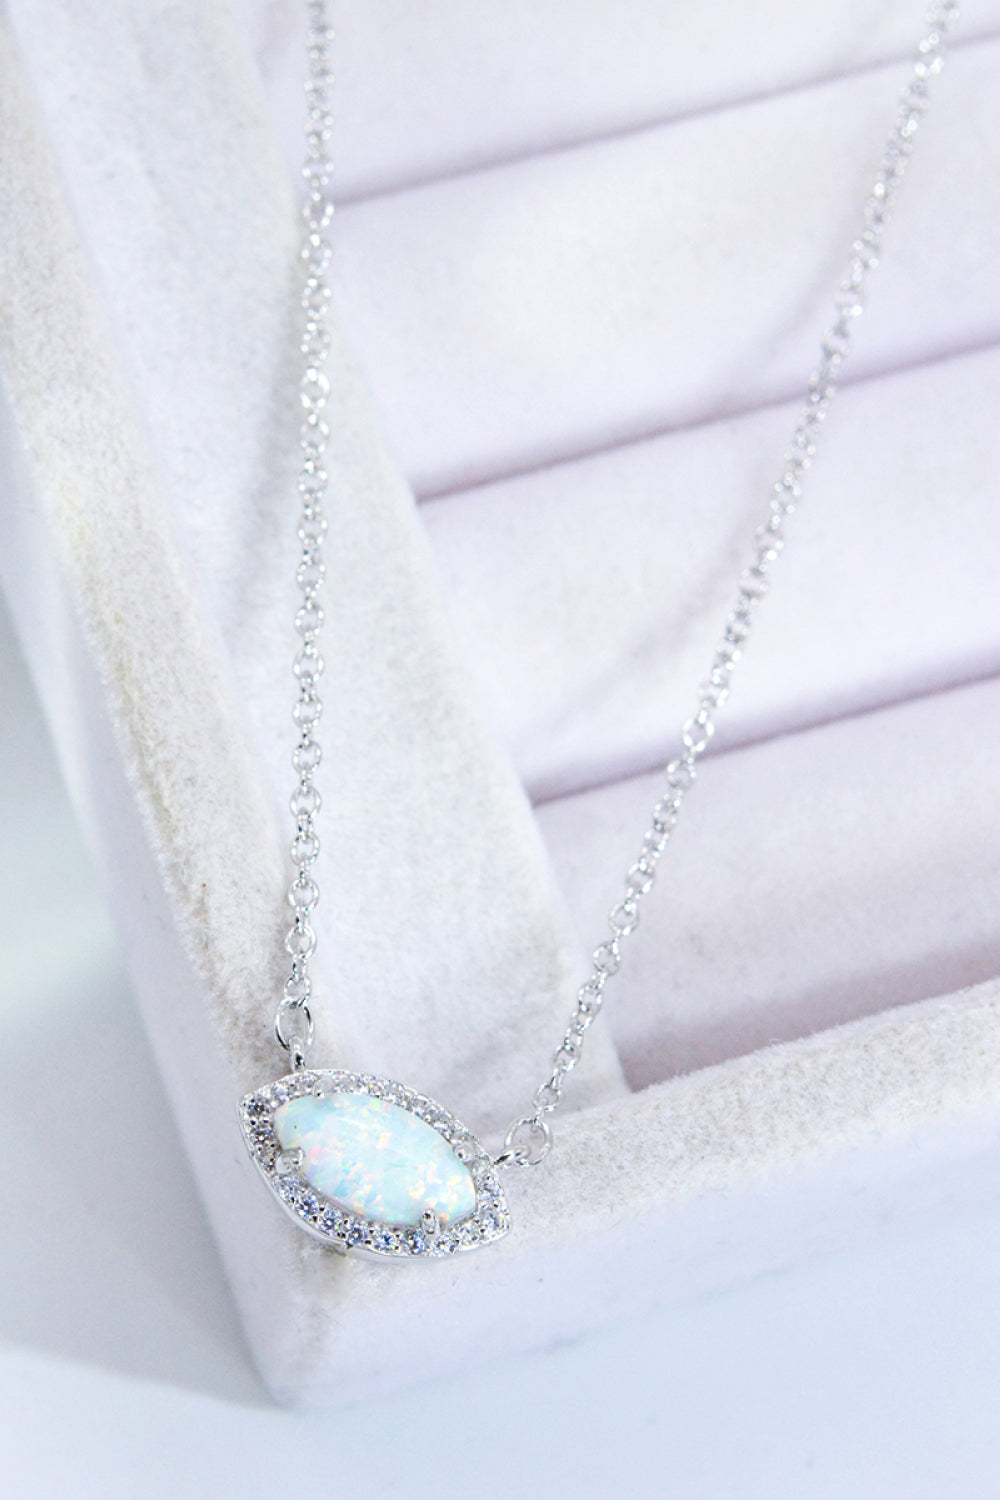 18k Rose Gold-Plated Opal Pendant Necklace - Necklaces - FITGGINS